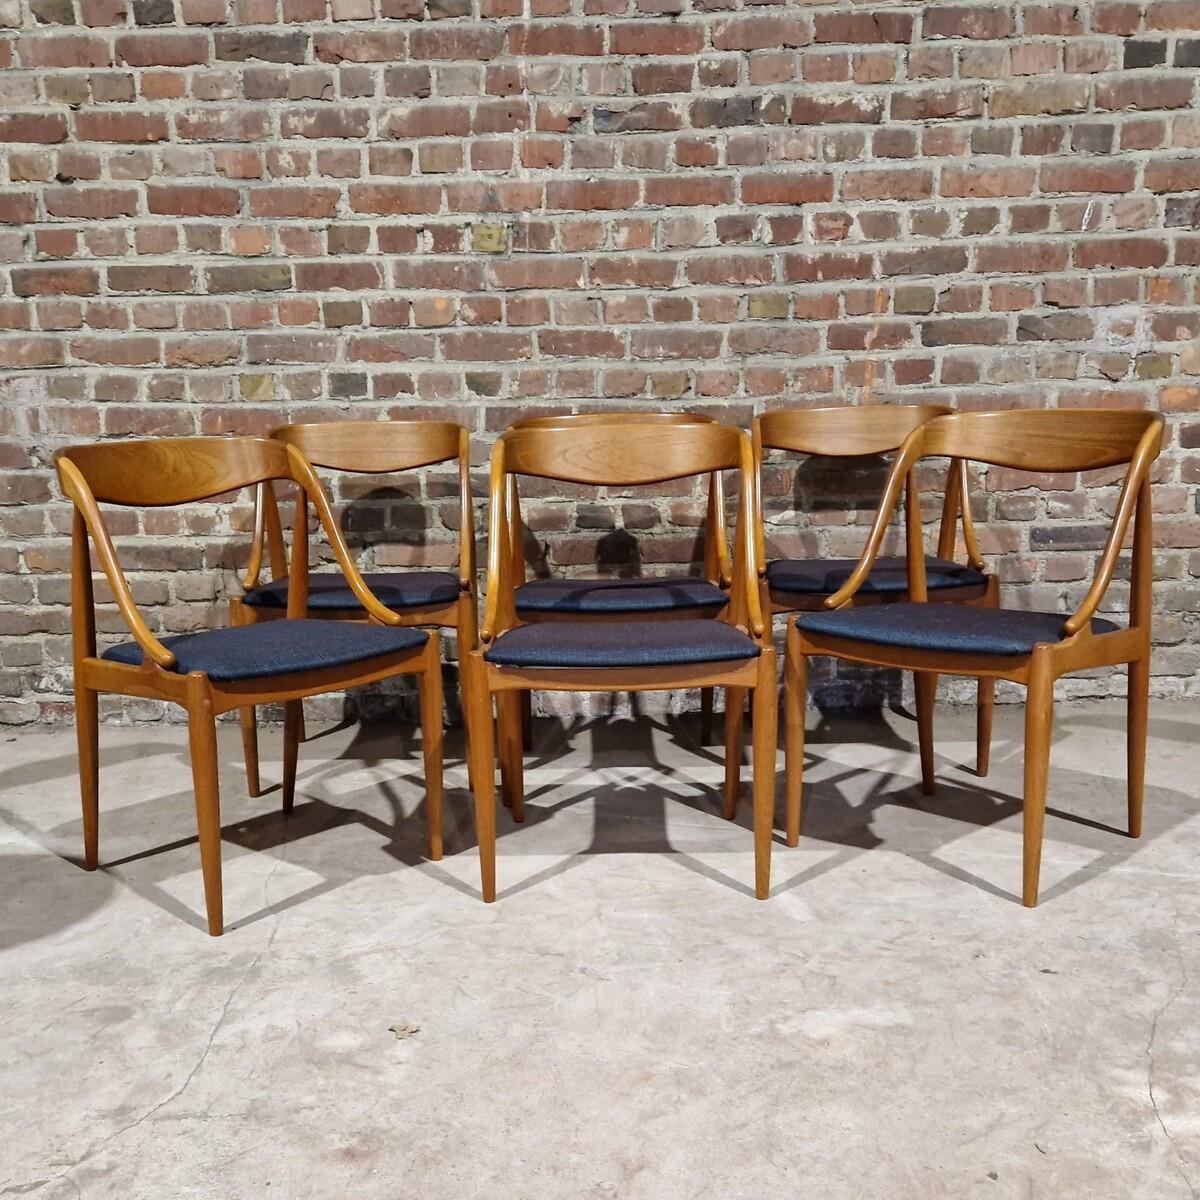 Set of six dining room chairs made by famous danish designer Johannès Andersen. The chairs were made in Denmark, in the also famous Uldum Mobelfabrik. The original factory sticker can be found on the chairs. The overall look of the chair is elegant